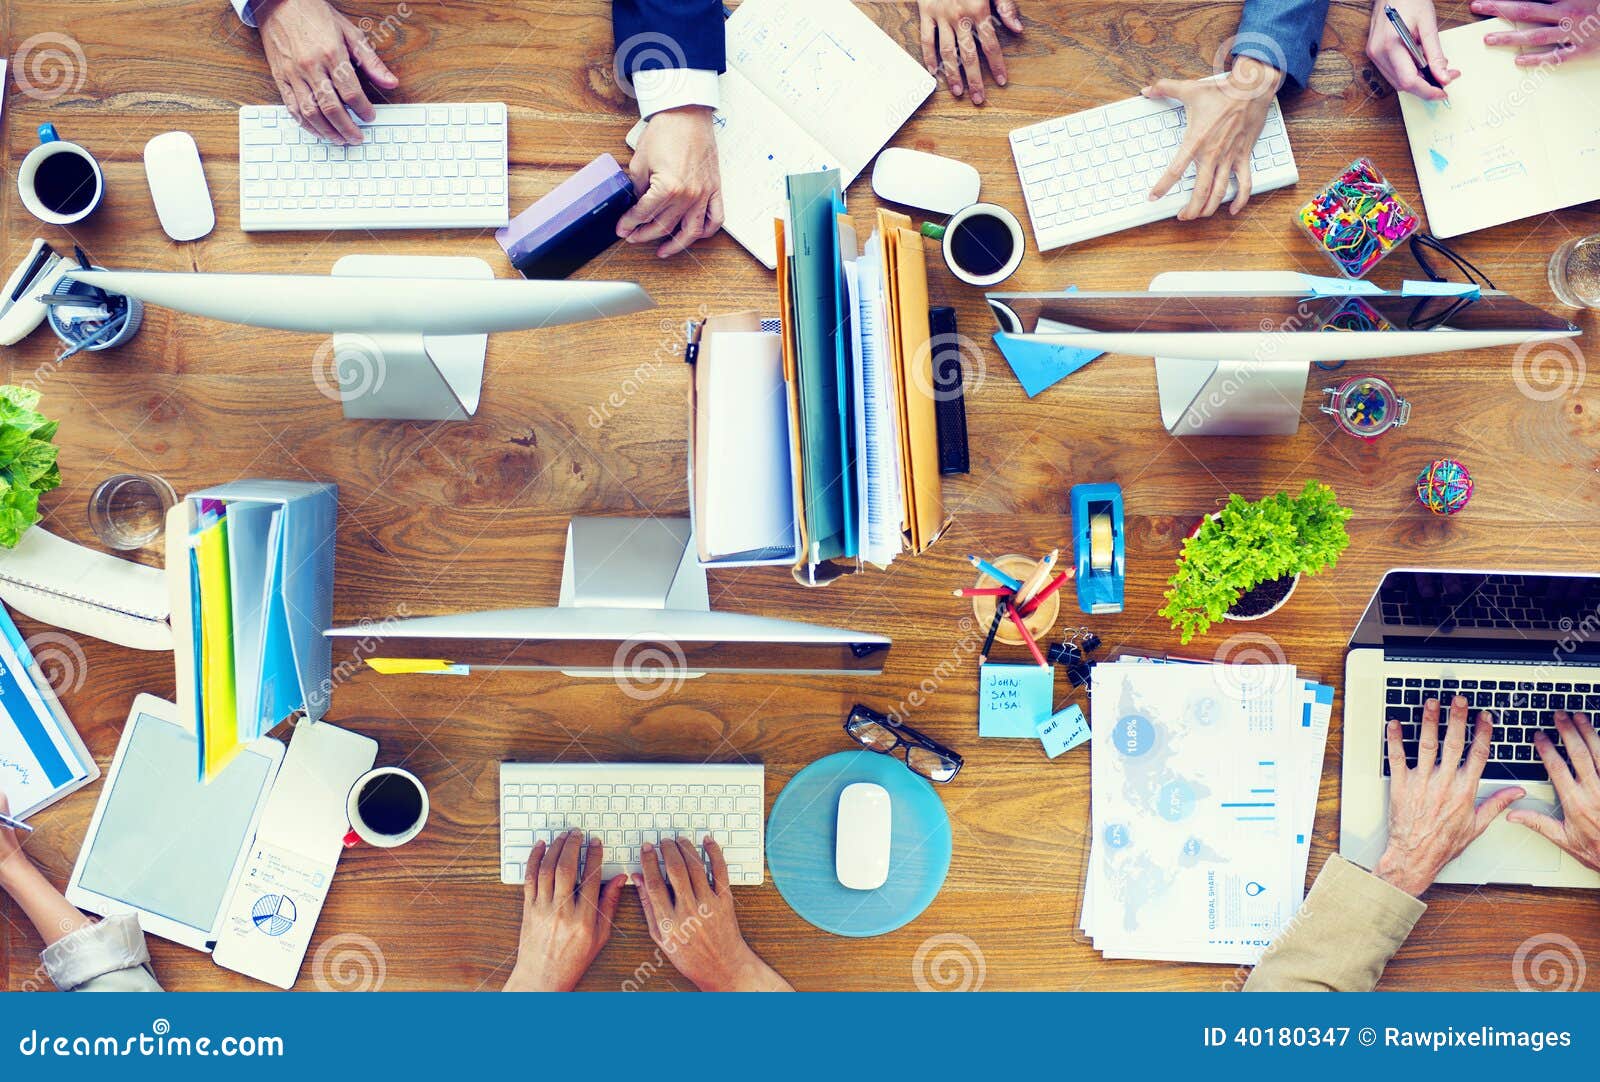 group of business people working on an office desk